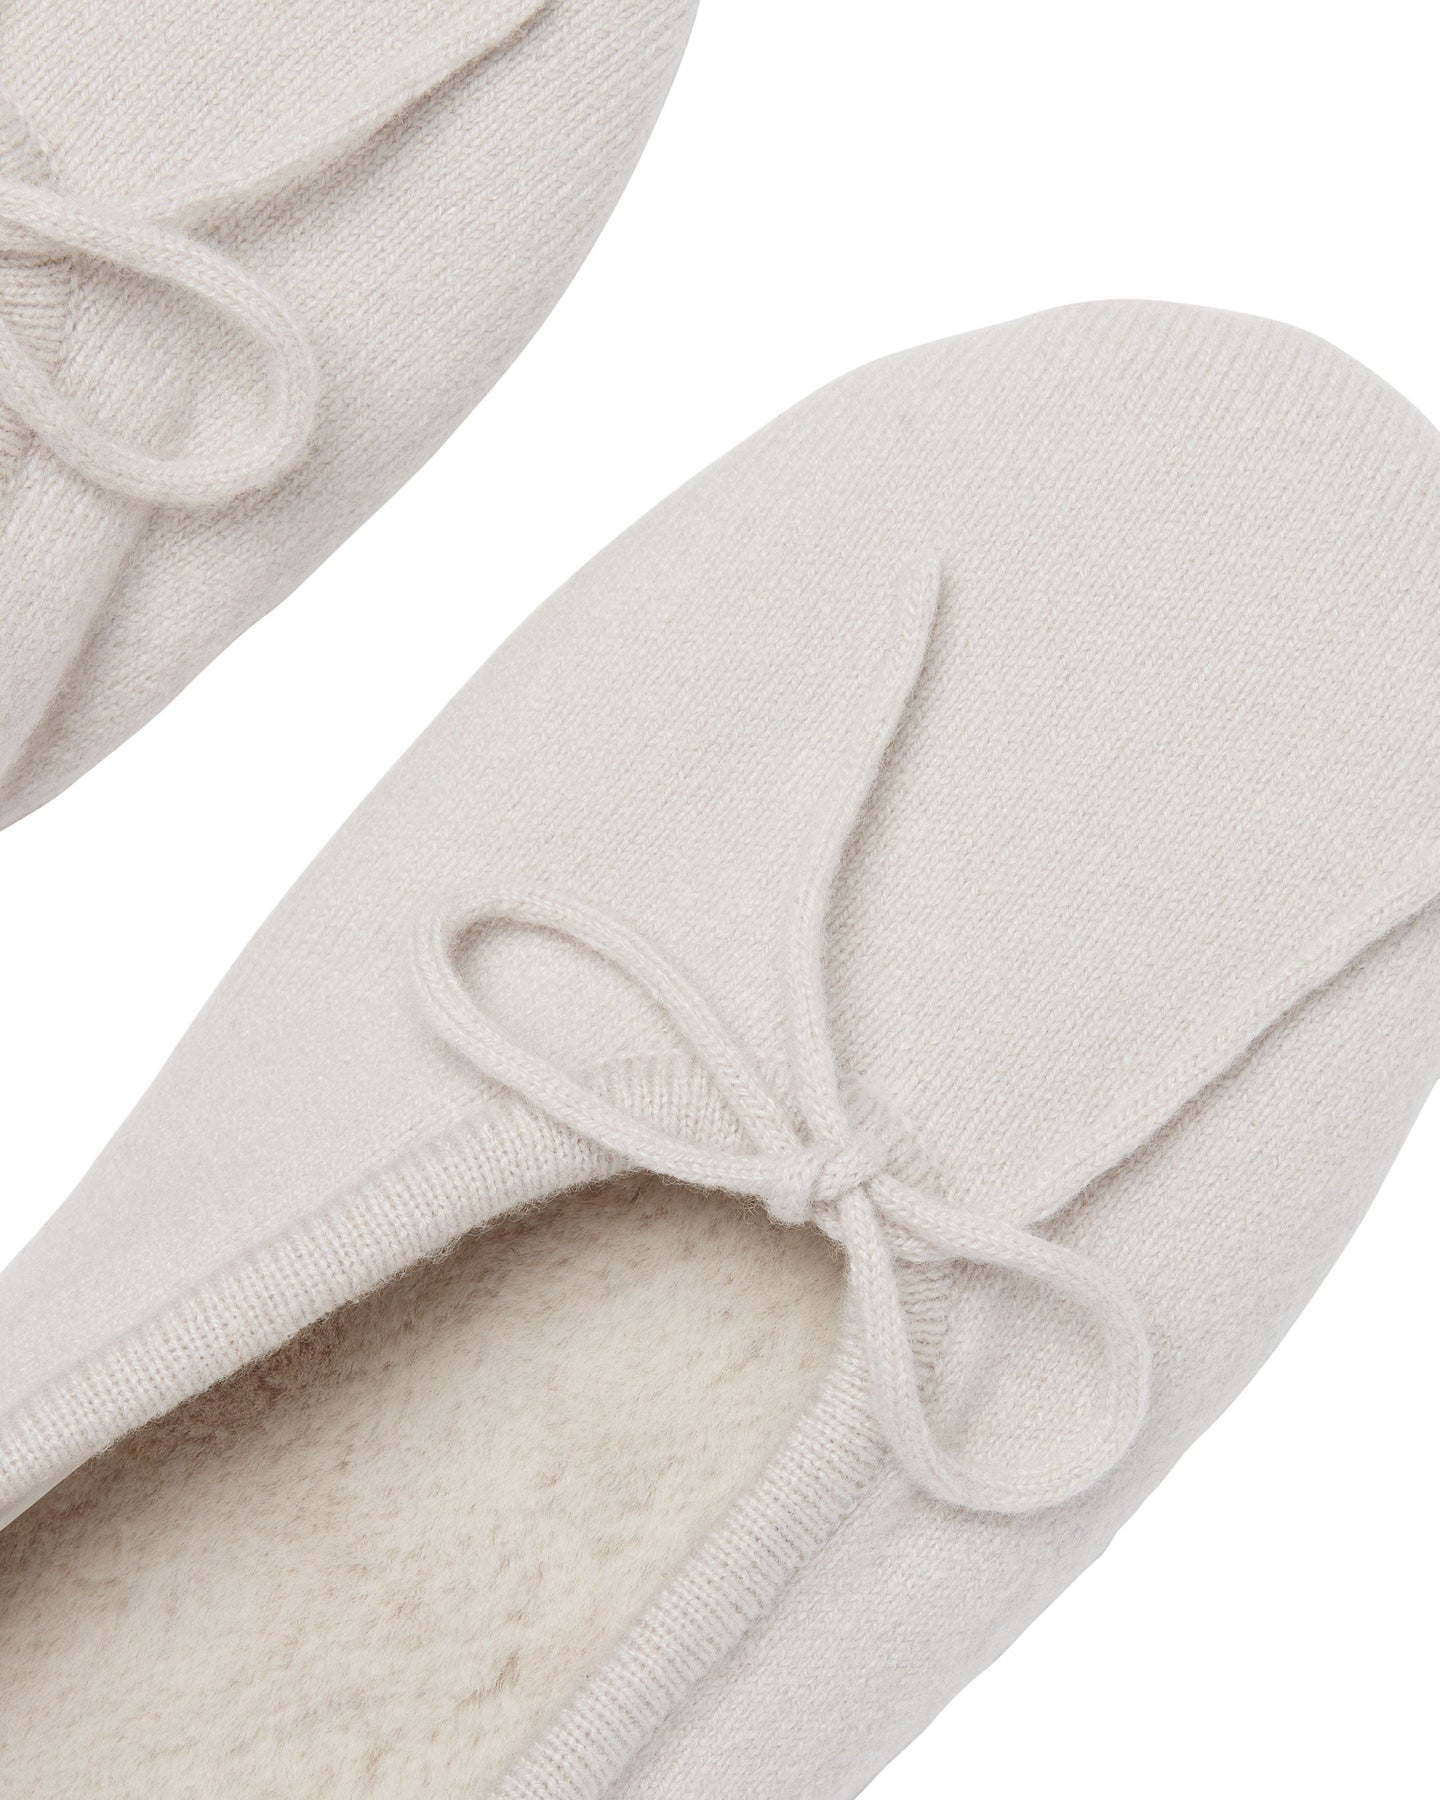 N.Peal Women's Fur Lined Cashmere Slippers Snow Grey